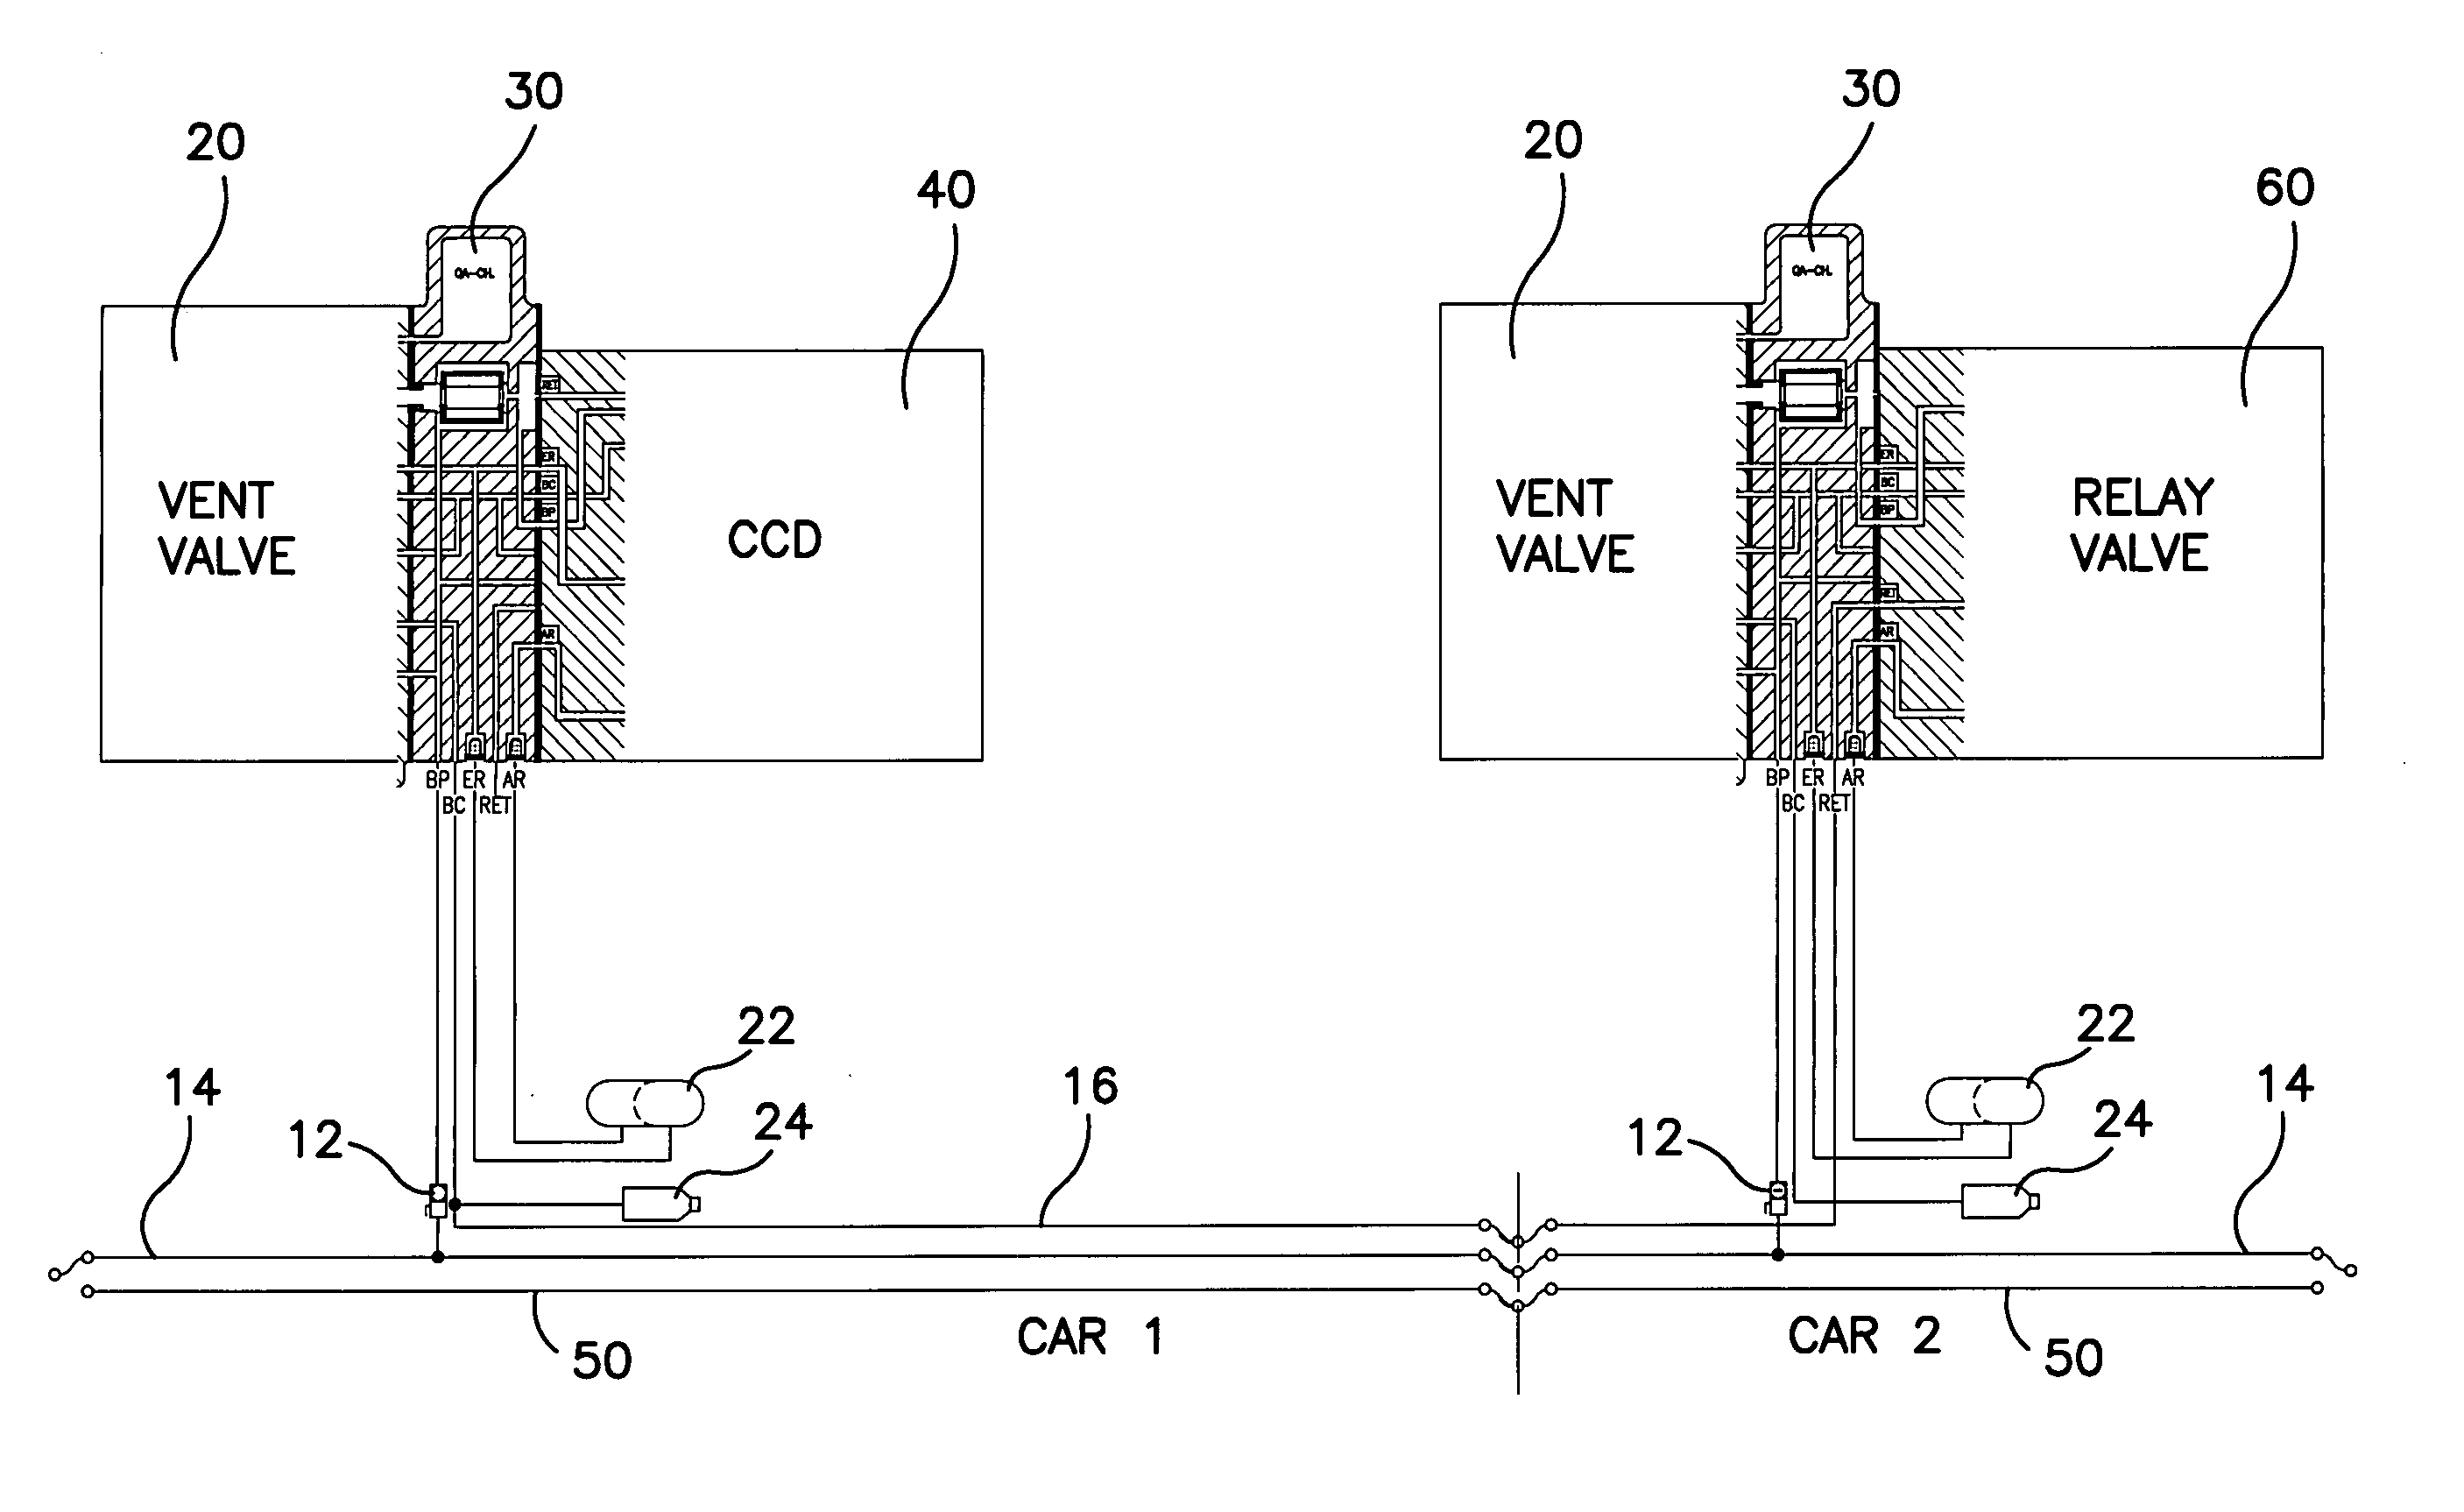 Relay configuration for an electro-pneumatic train